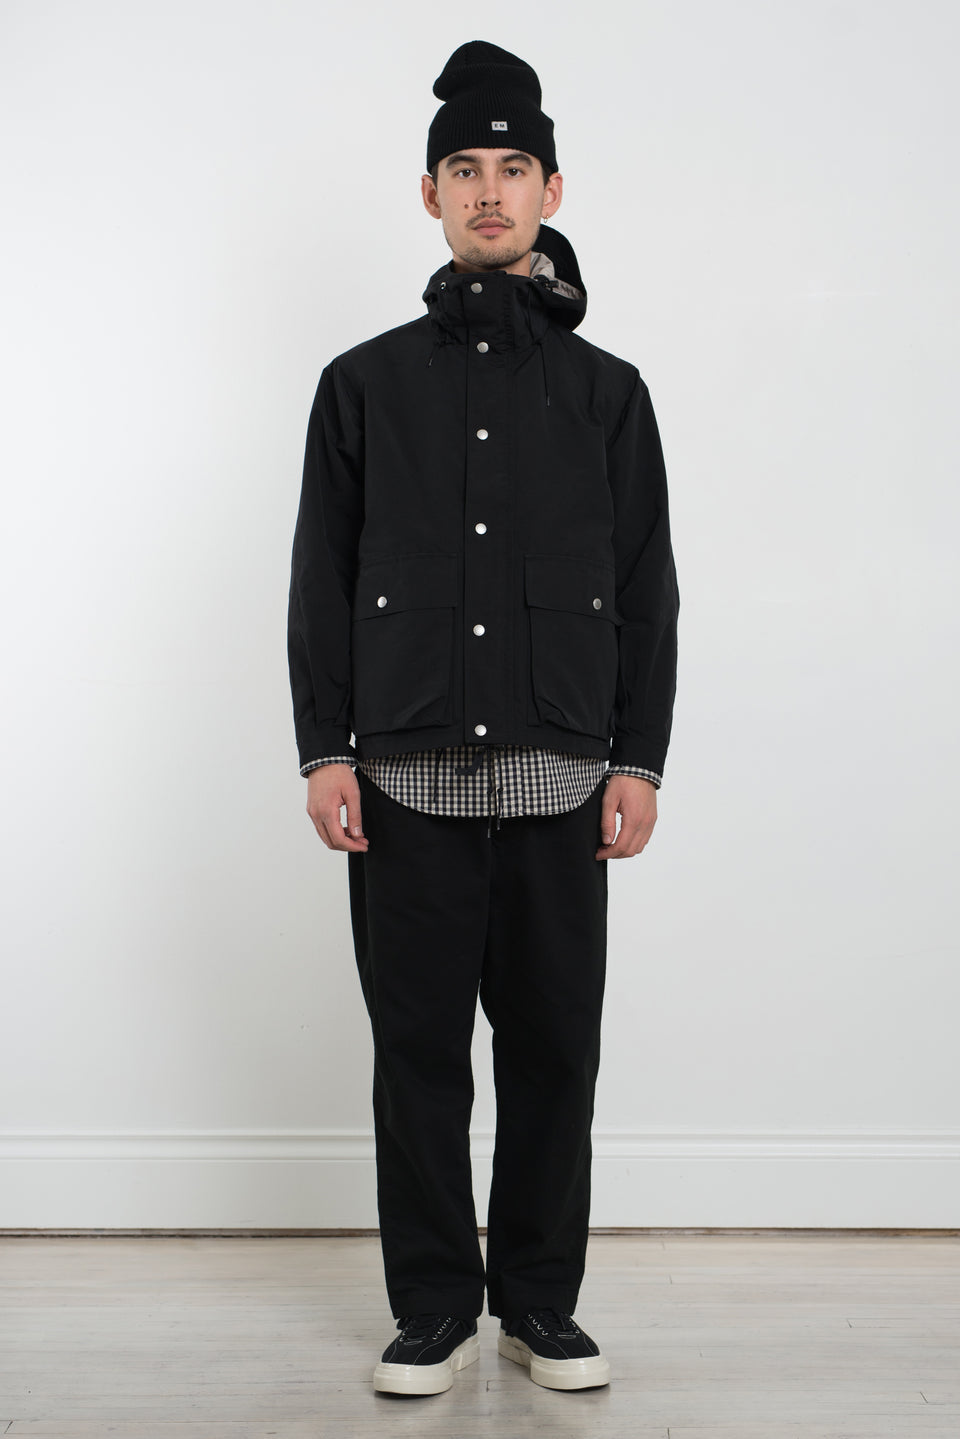 ends and means sanpo jacket-